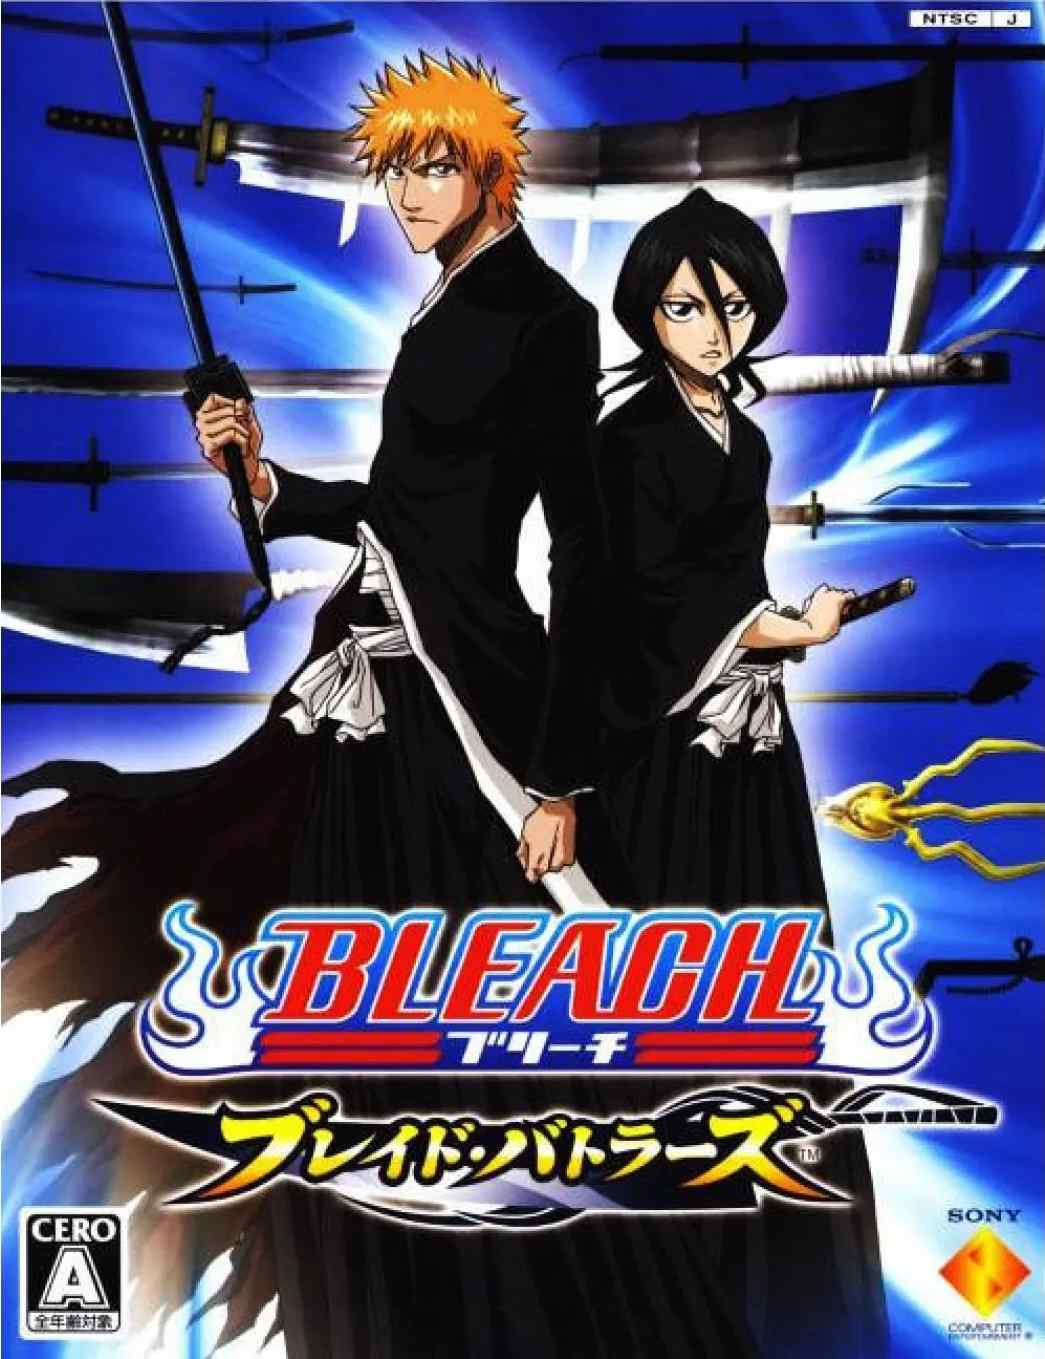 The excellent game Bleach: Blade Battlers is a 2006 Sega PS2 fighting game by Raijin.